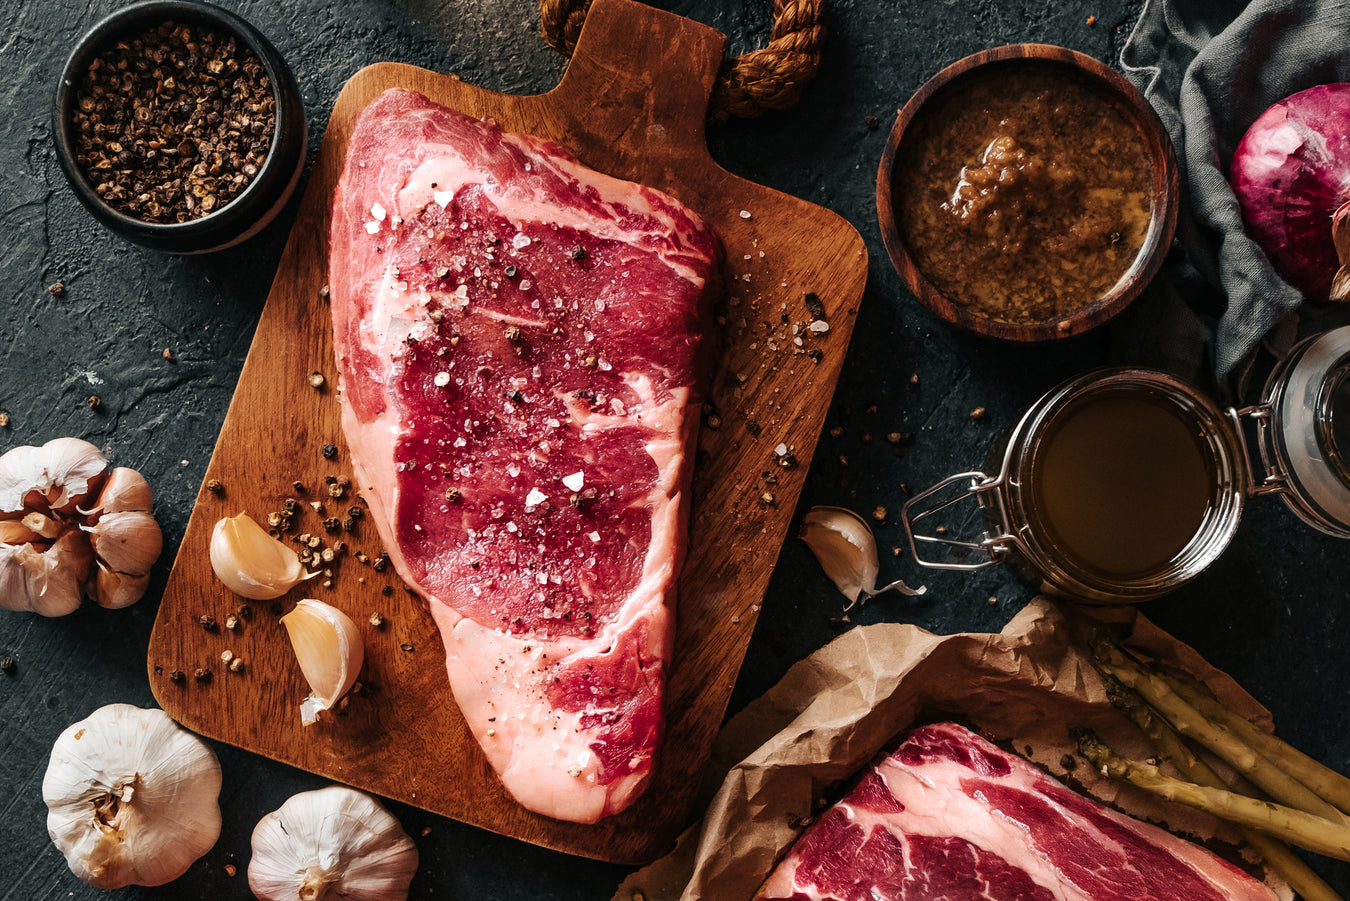 Dine-at-Home Kits - Meat Depot | Buy Quality Meats and Seafood Online